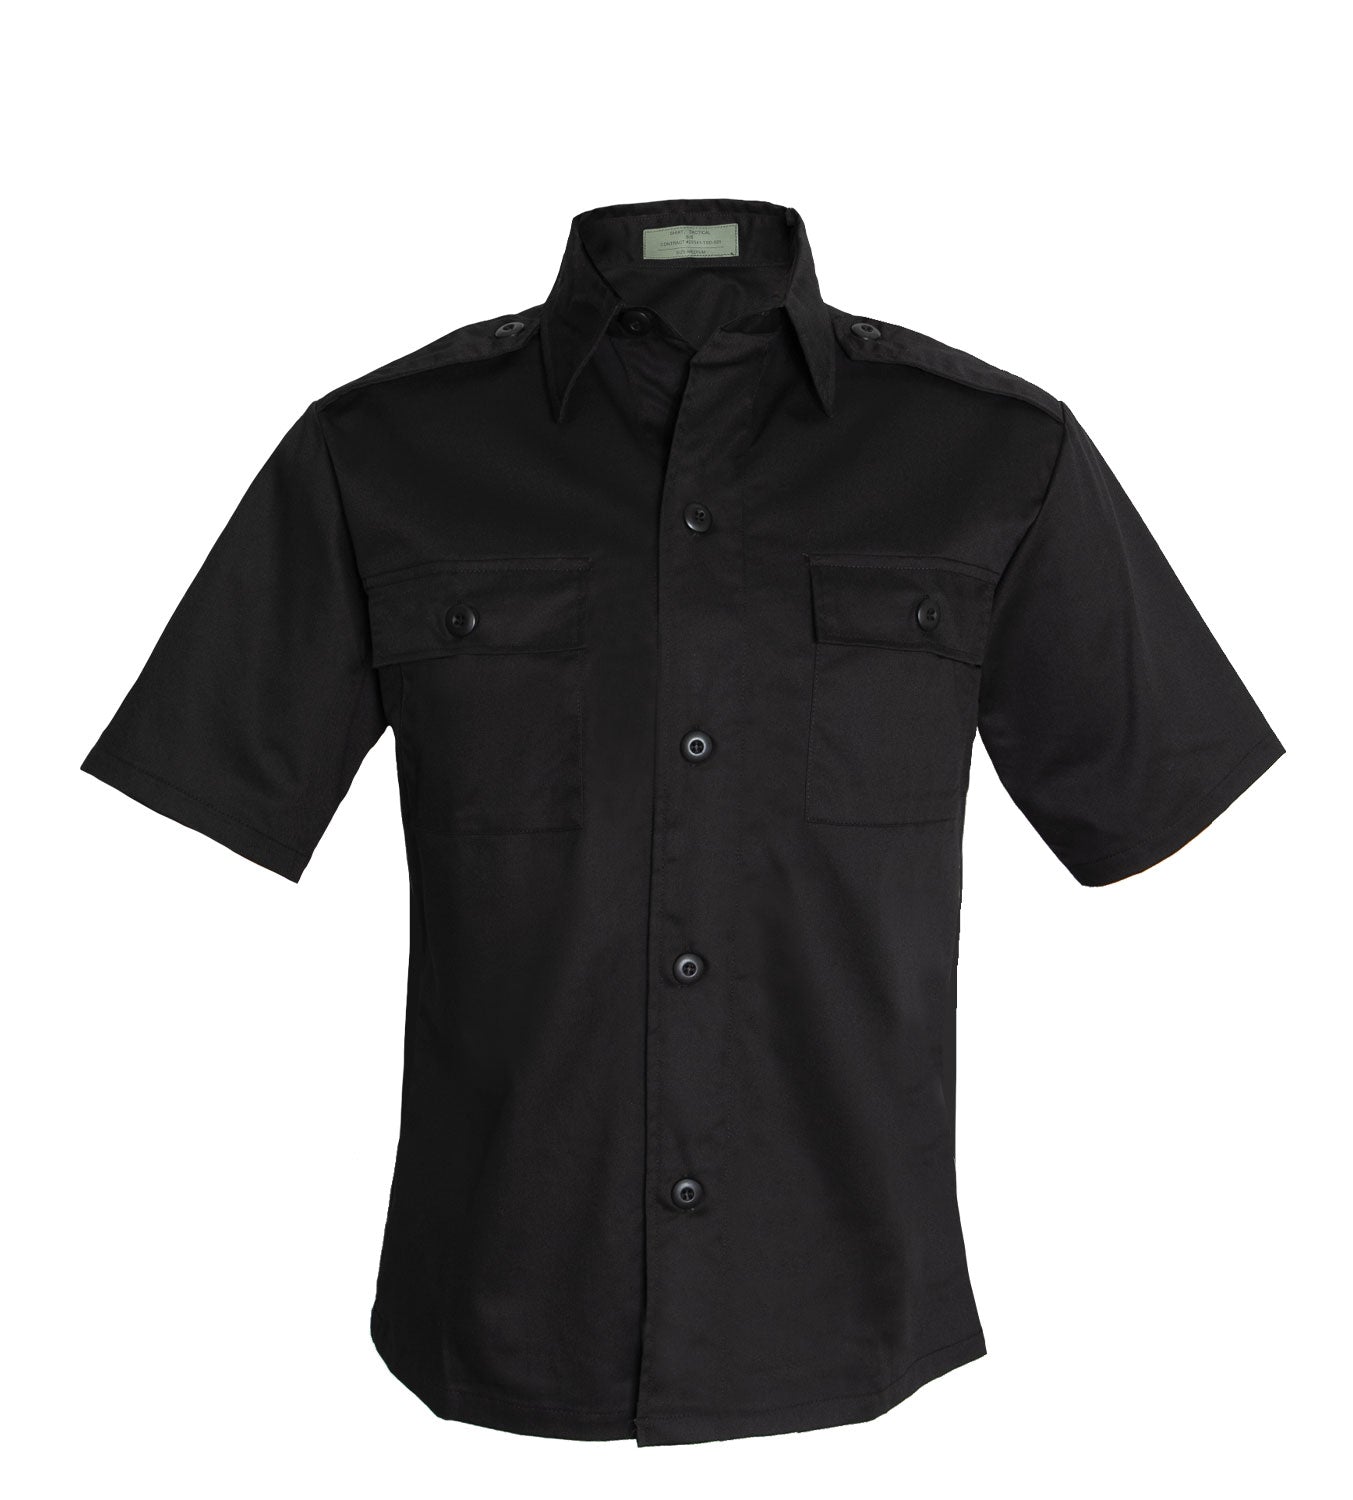 [Public Safety] Poly/Cotton Short-Sleeve Tactical Shirts Black